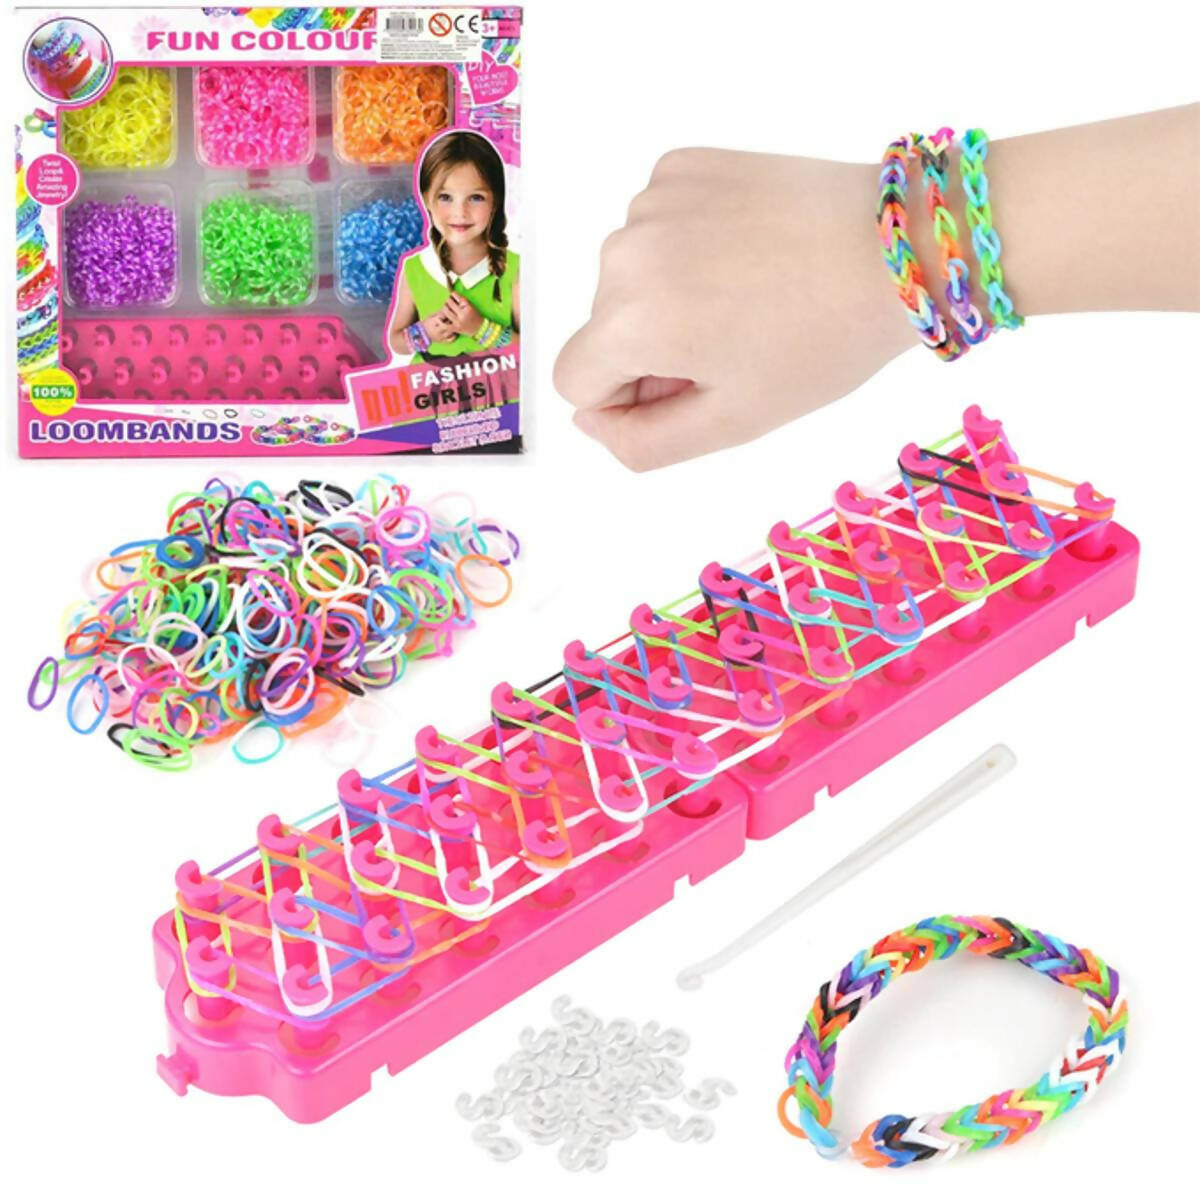 Loom Rubber Bands Bracelet Kit With Premium Quality Accessories - 6 Unique Bright Color Bands, Refill Kit for Girls & Boys